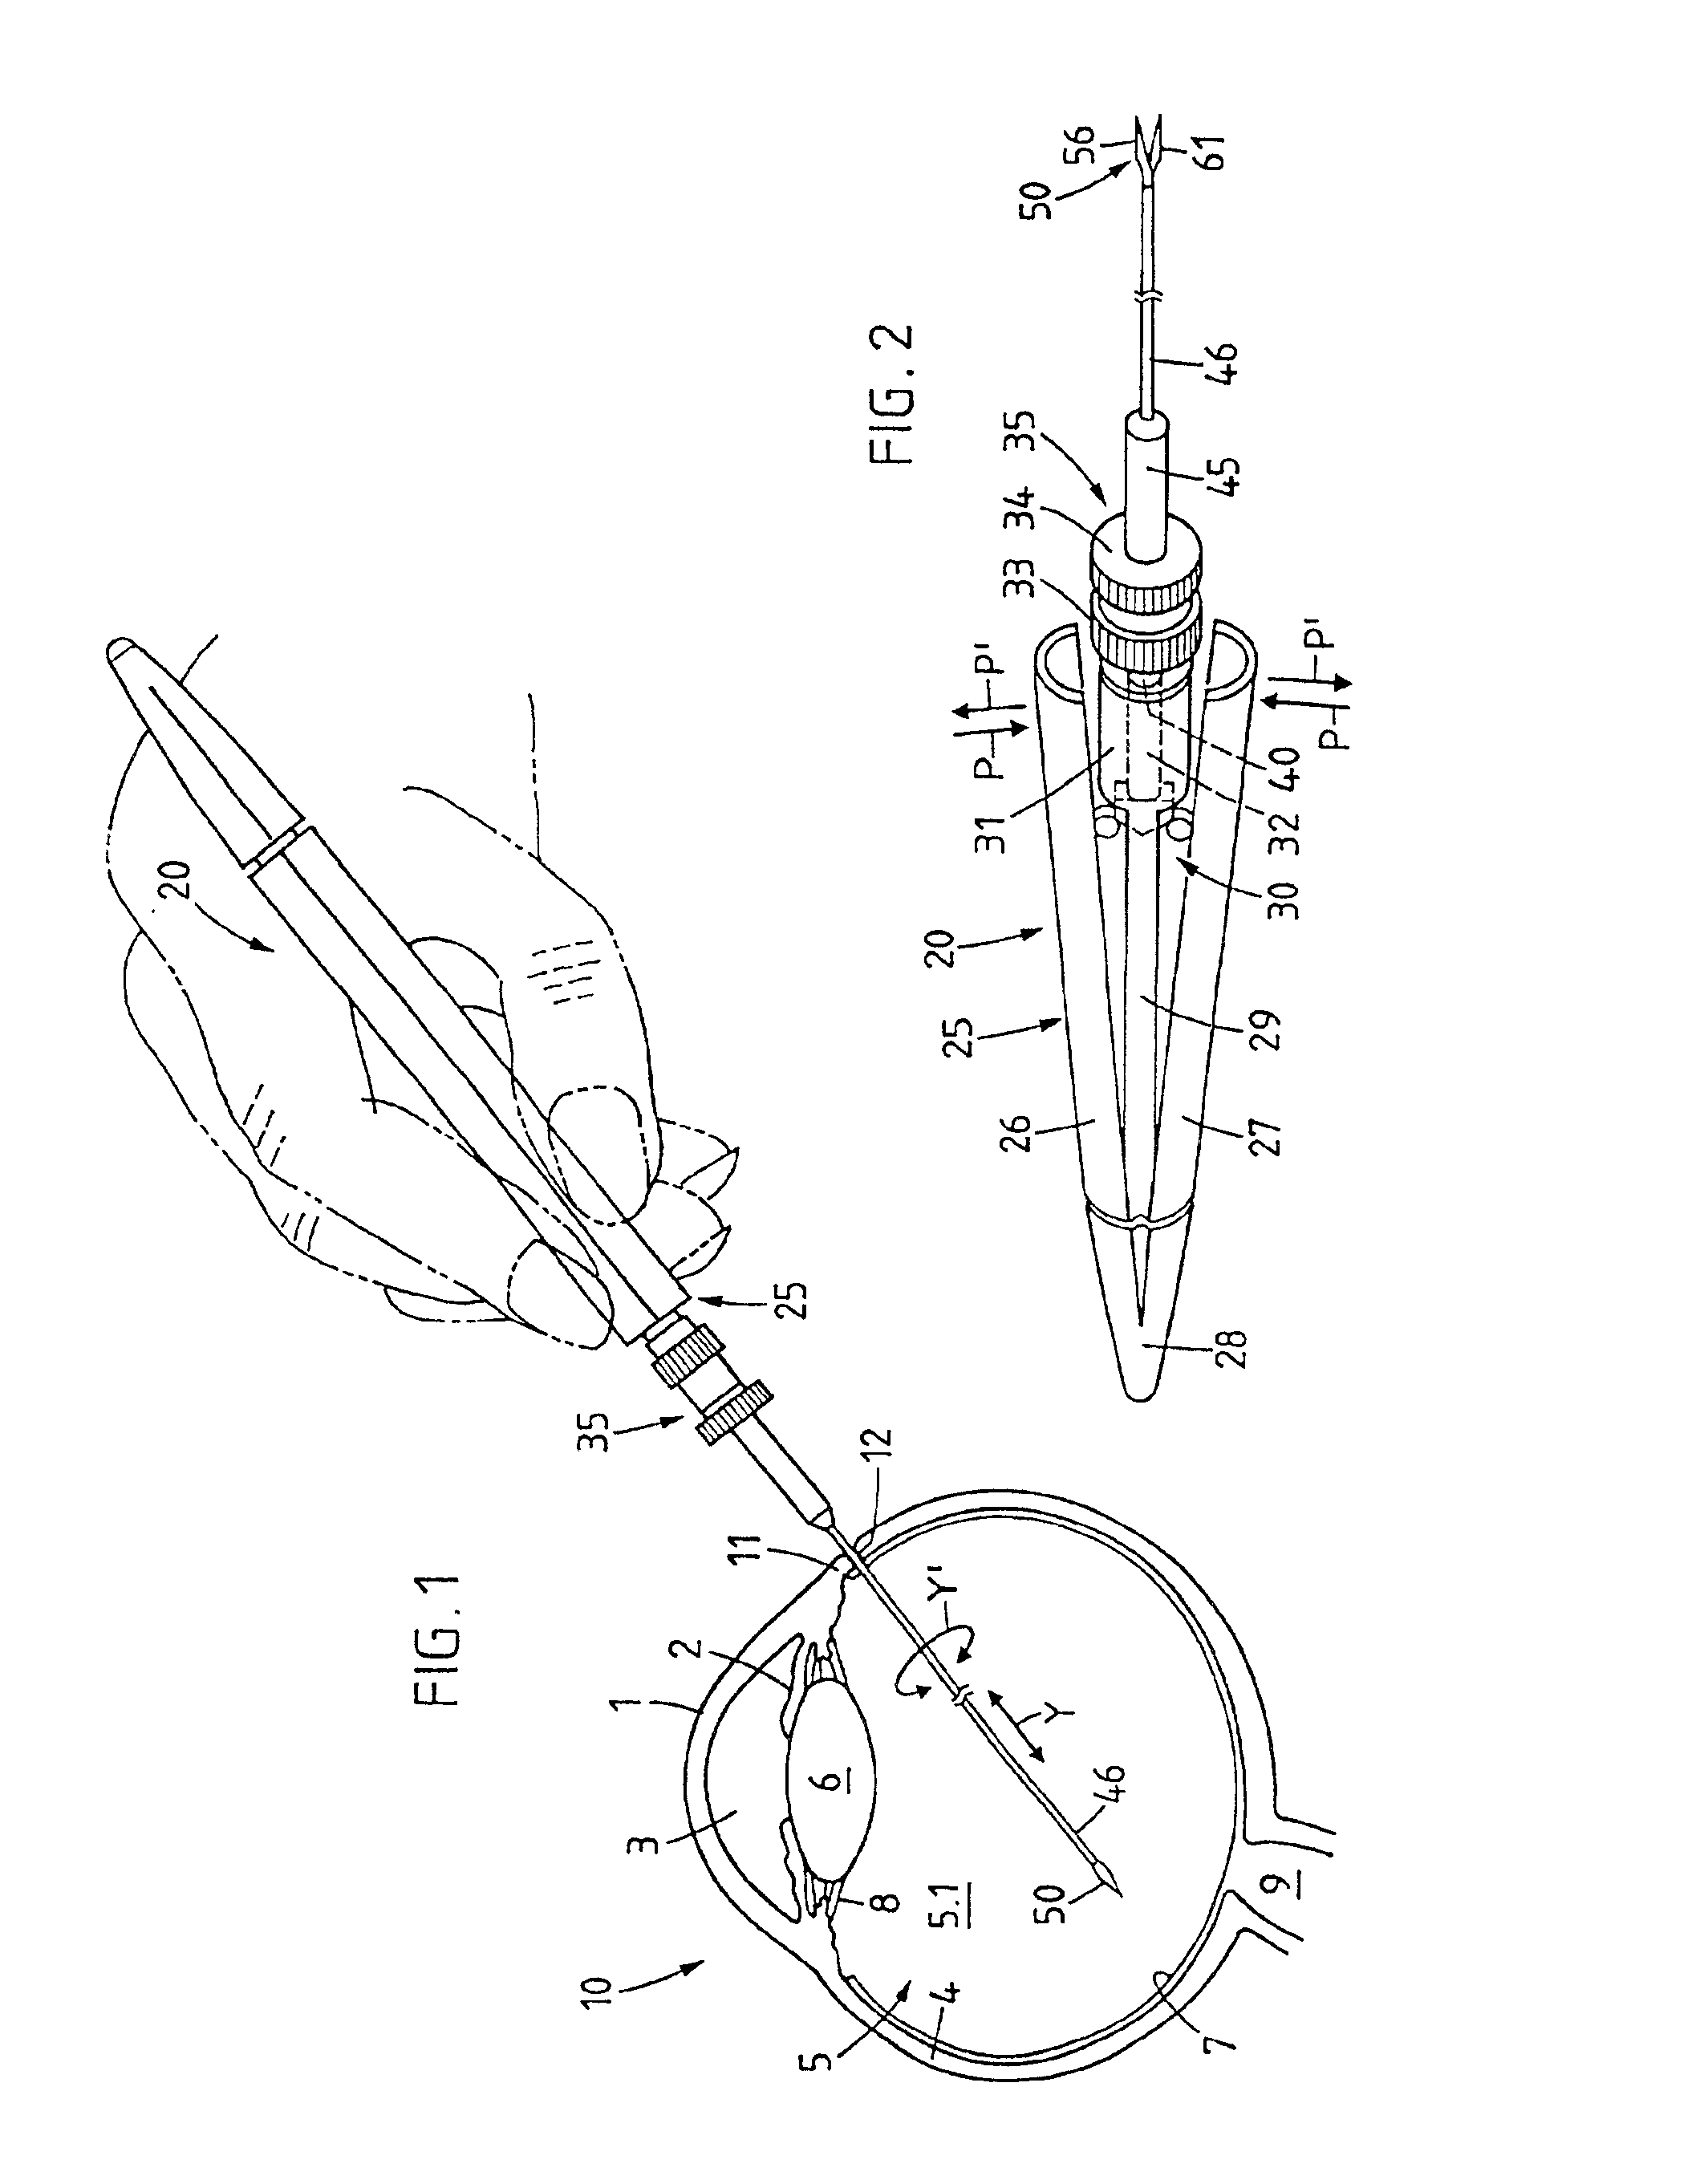 Micro surgical cutting instrument configured as scissors